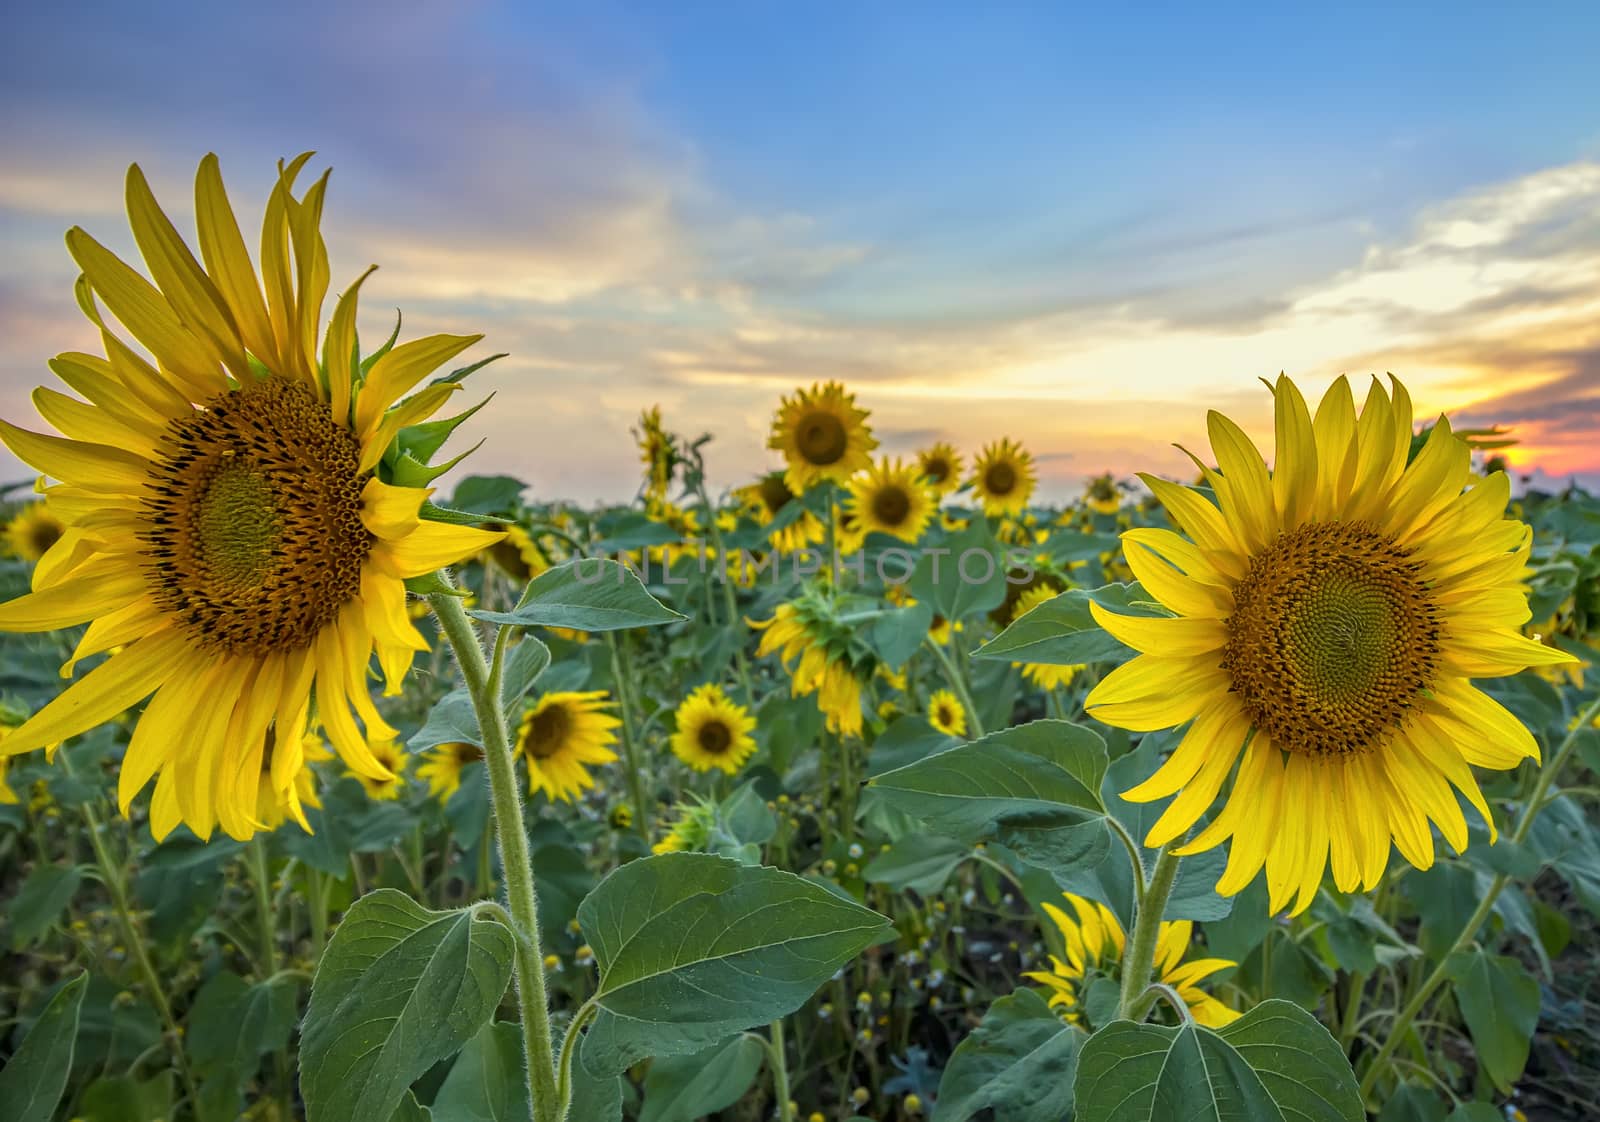  field of blooming sunflowers on a background sunset.